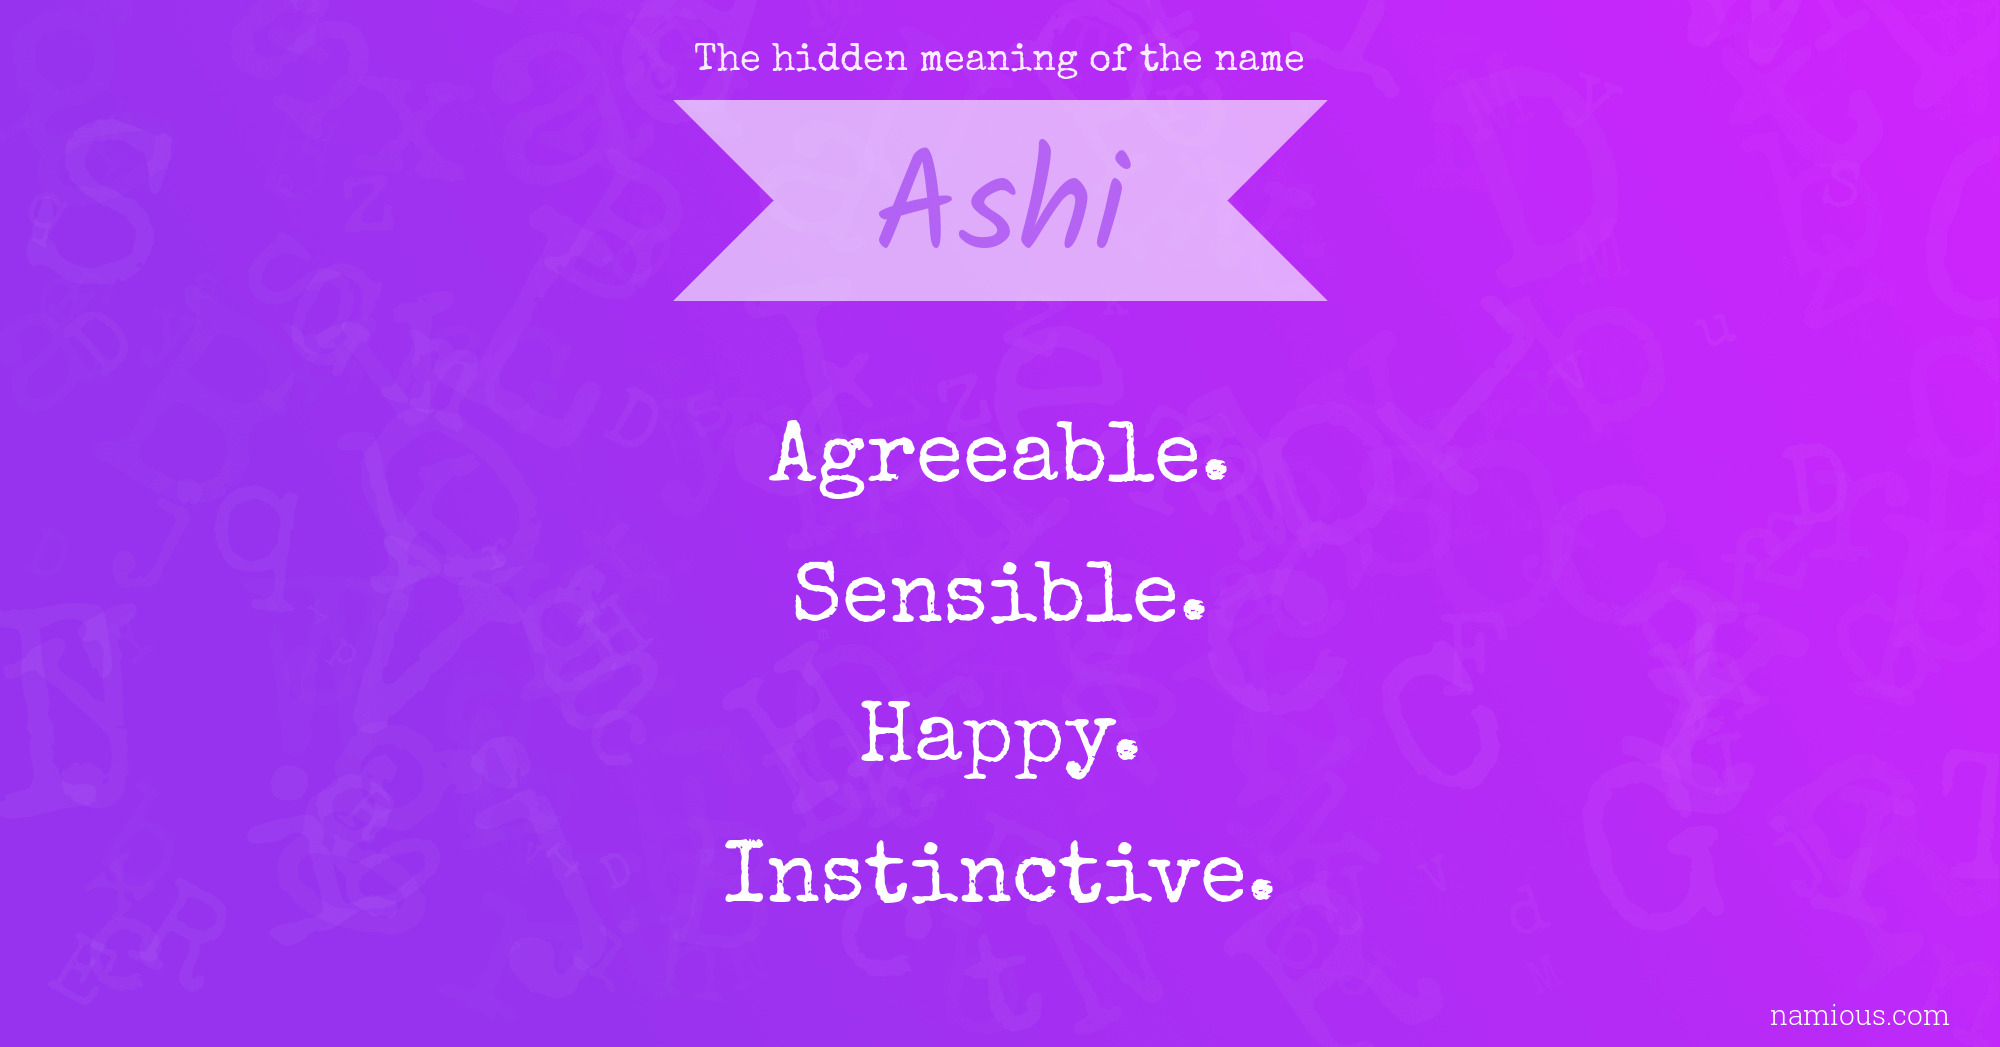 The hidden meaning of the name Ashi